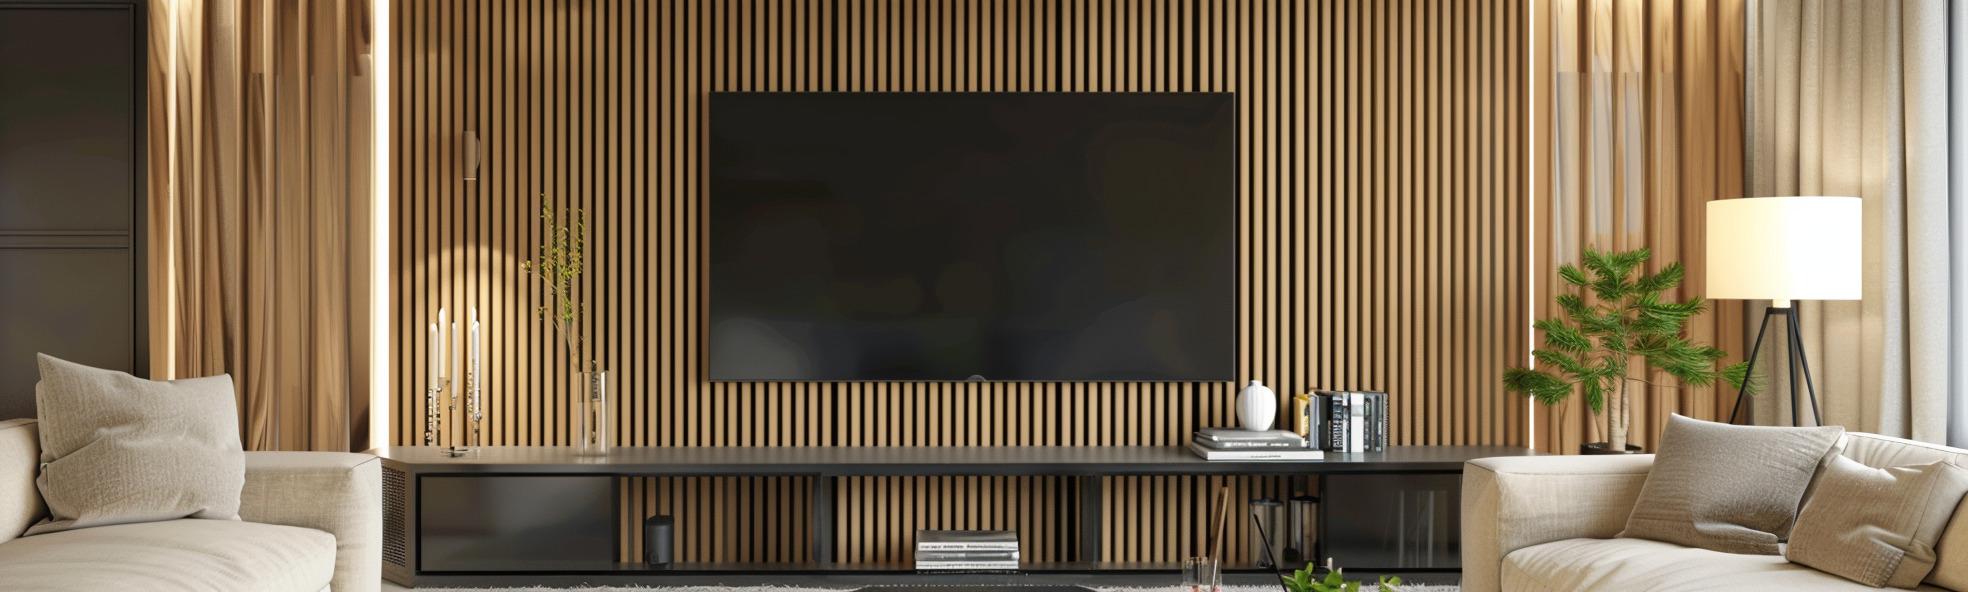 Enjoy Quieter Rooms with Our Advanced Wood Slat Acoustic Panels